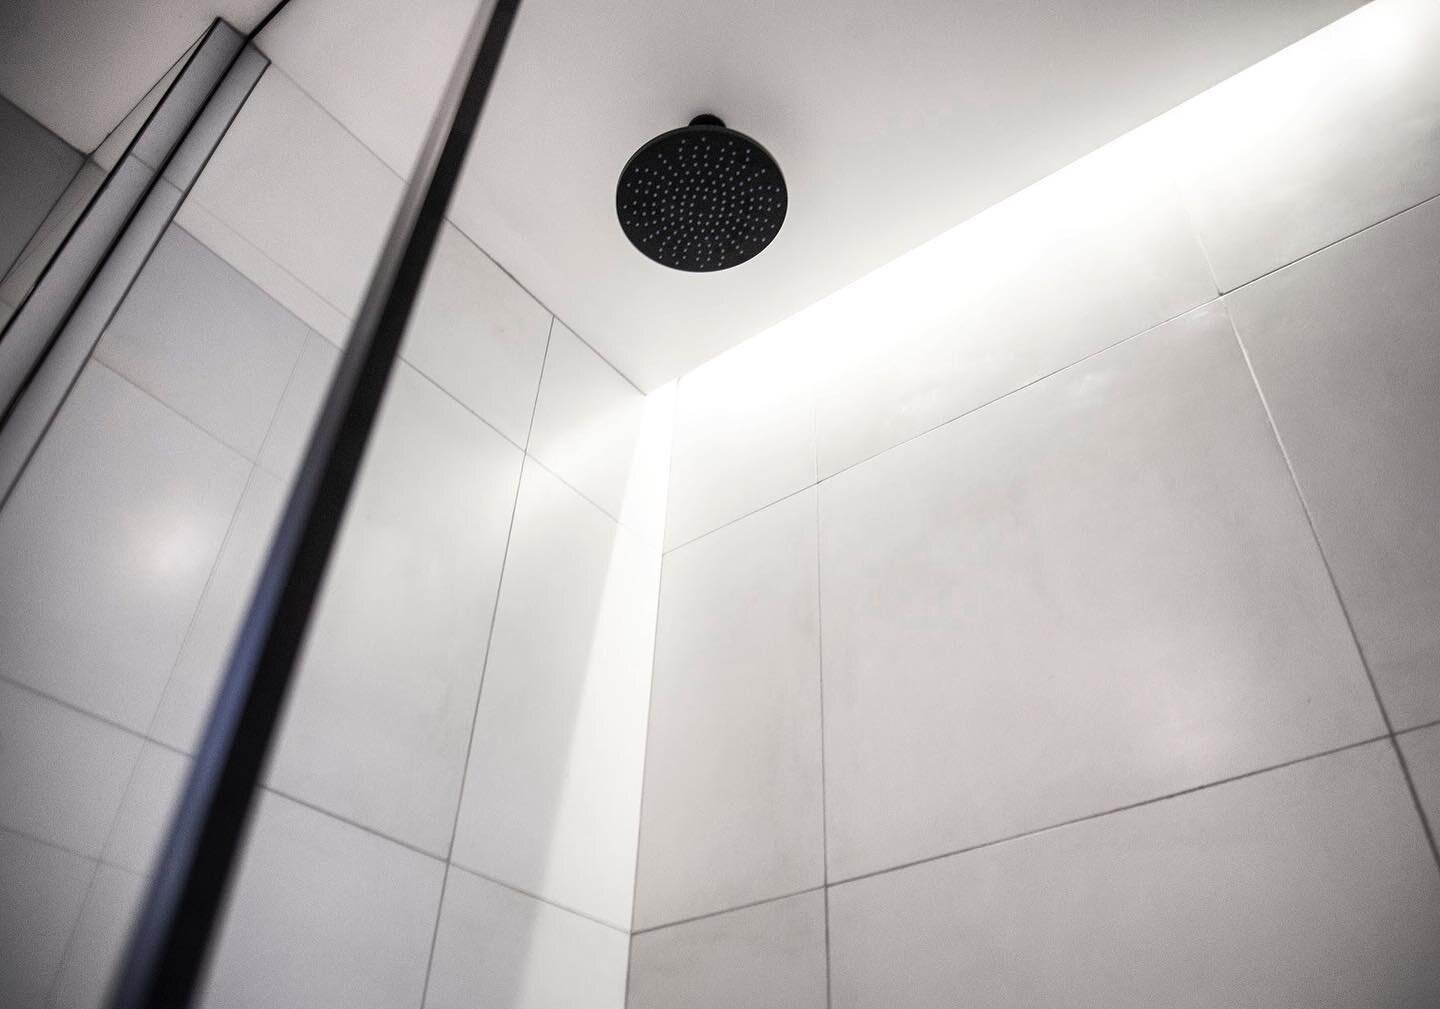 When it 🌧 it pours... and we&rsquo;re not just talking about this matte black rain shower. ⠀
-⠀
With the world at a standstill we want to take the time to recognize how important it is to come together as a community. Here in New York City, where ma